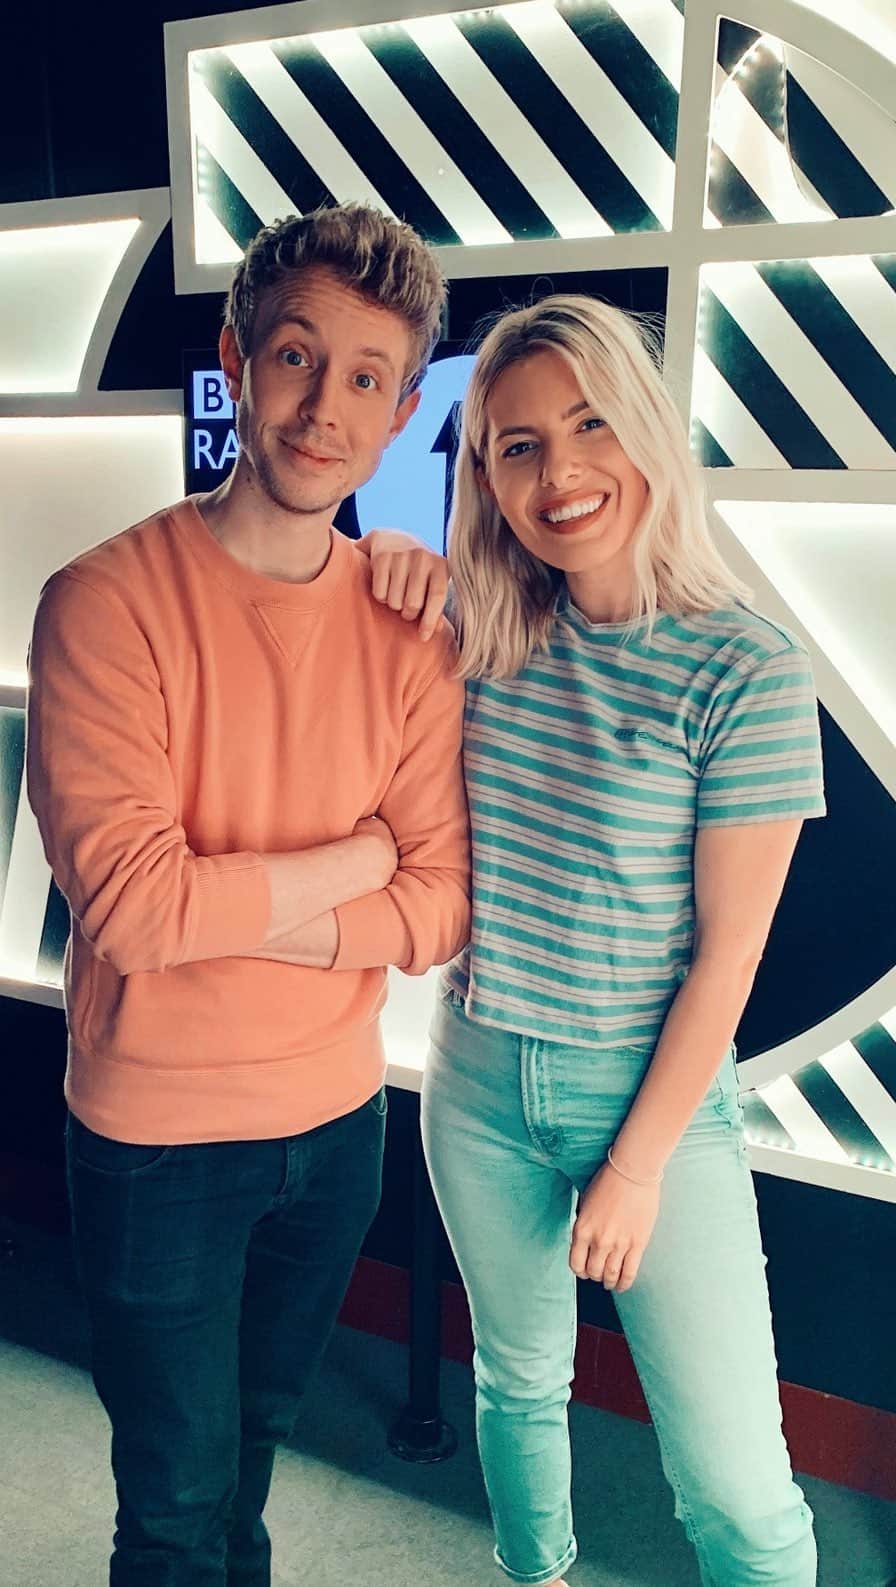 Mollie Kingのインスタグラム：「Today is the day…first day back on the Matt and Mollie show on @bbcradio1 🙌 I genuinely can’t wait to be back in the studio with my buddy @matthewedmondson and to have more laughs like this “fajitas gate”! As much as we love to thrash each other in Matt vs Mollie, I have to admit, I’ve really missed him! Feels like we’ve got so much to catch up on! I’m so excited to hear from all our lovely listeners too and what you’ve all been up to. So come and join us at 1pm and let’s have a good old catch up!」